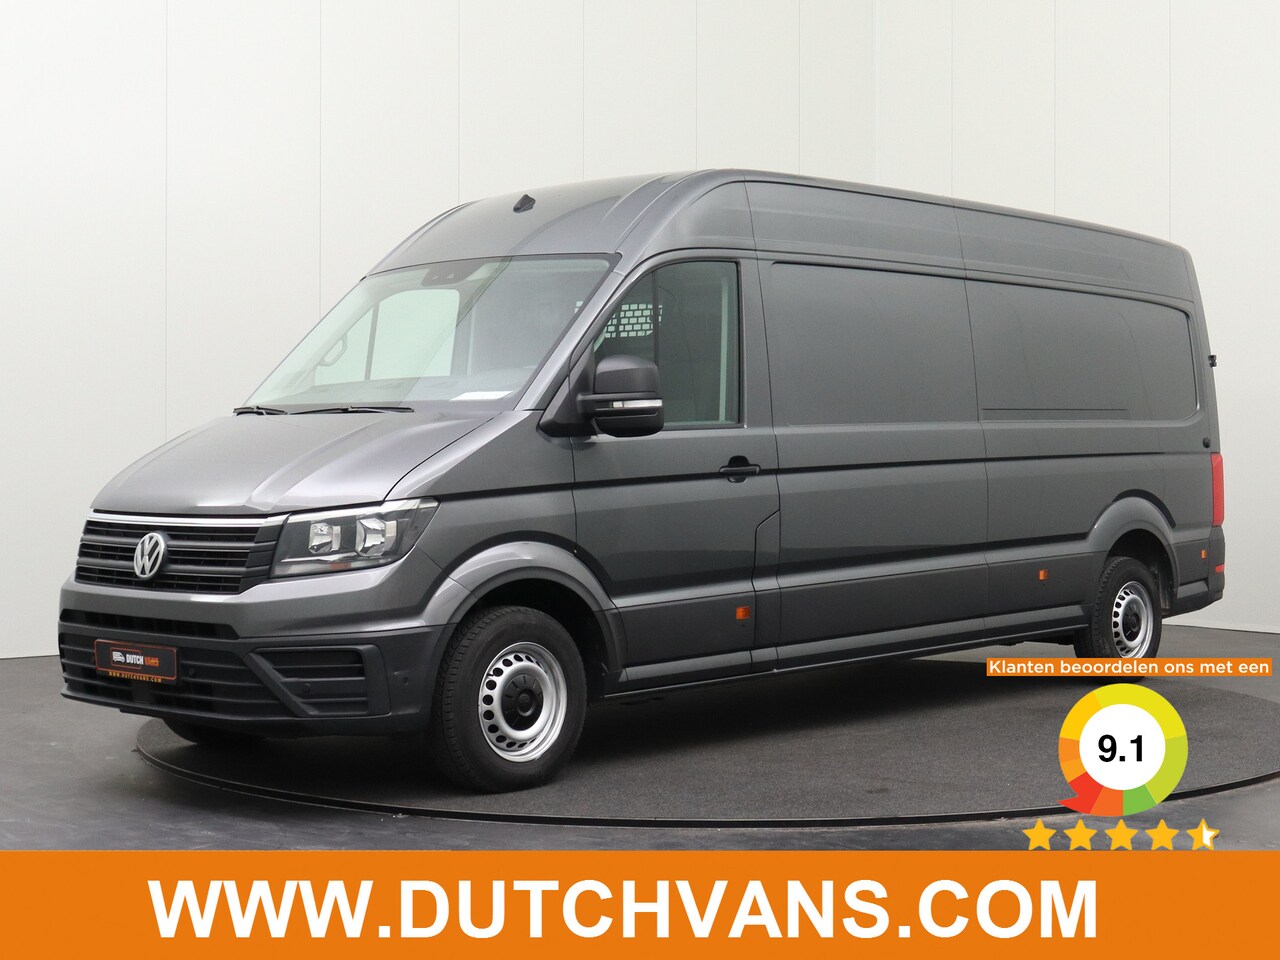 Volkswagen Crafter - 2.0TDI 177PK DSG Automaat L4H3 | Airco | Camera | Multimedia | 3-Persoons | Betimmering - AutoWereld.nl